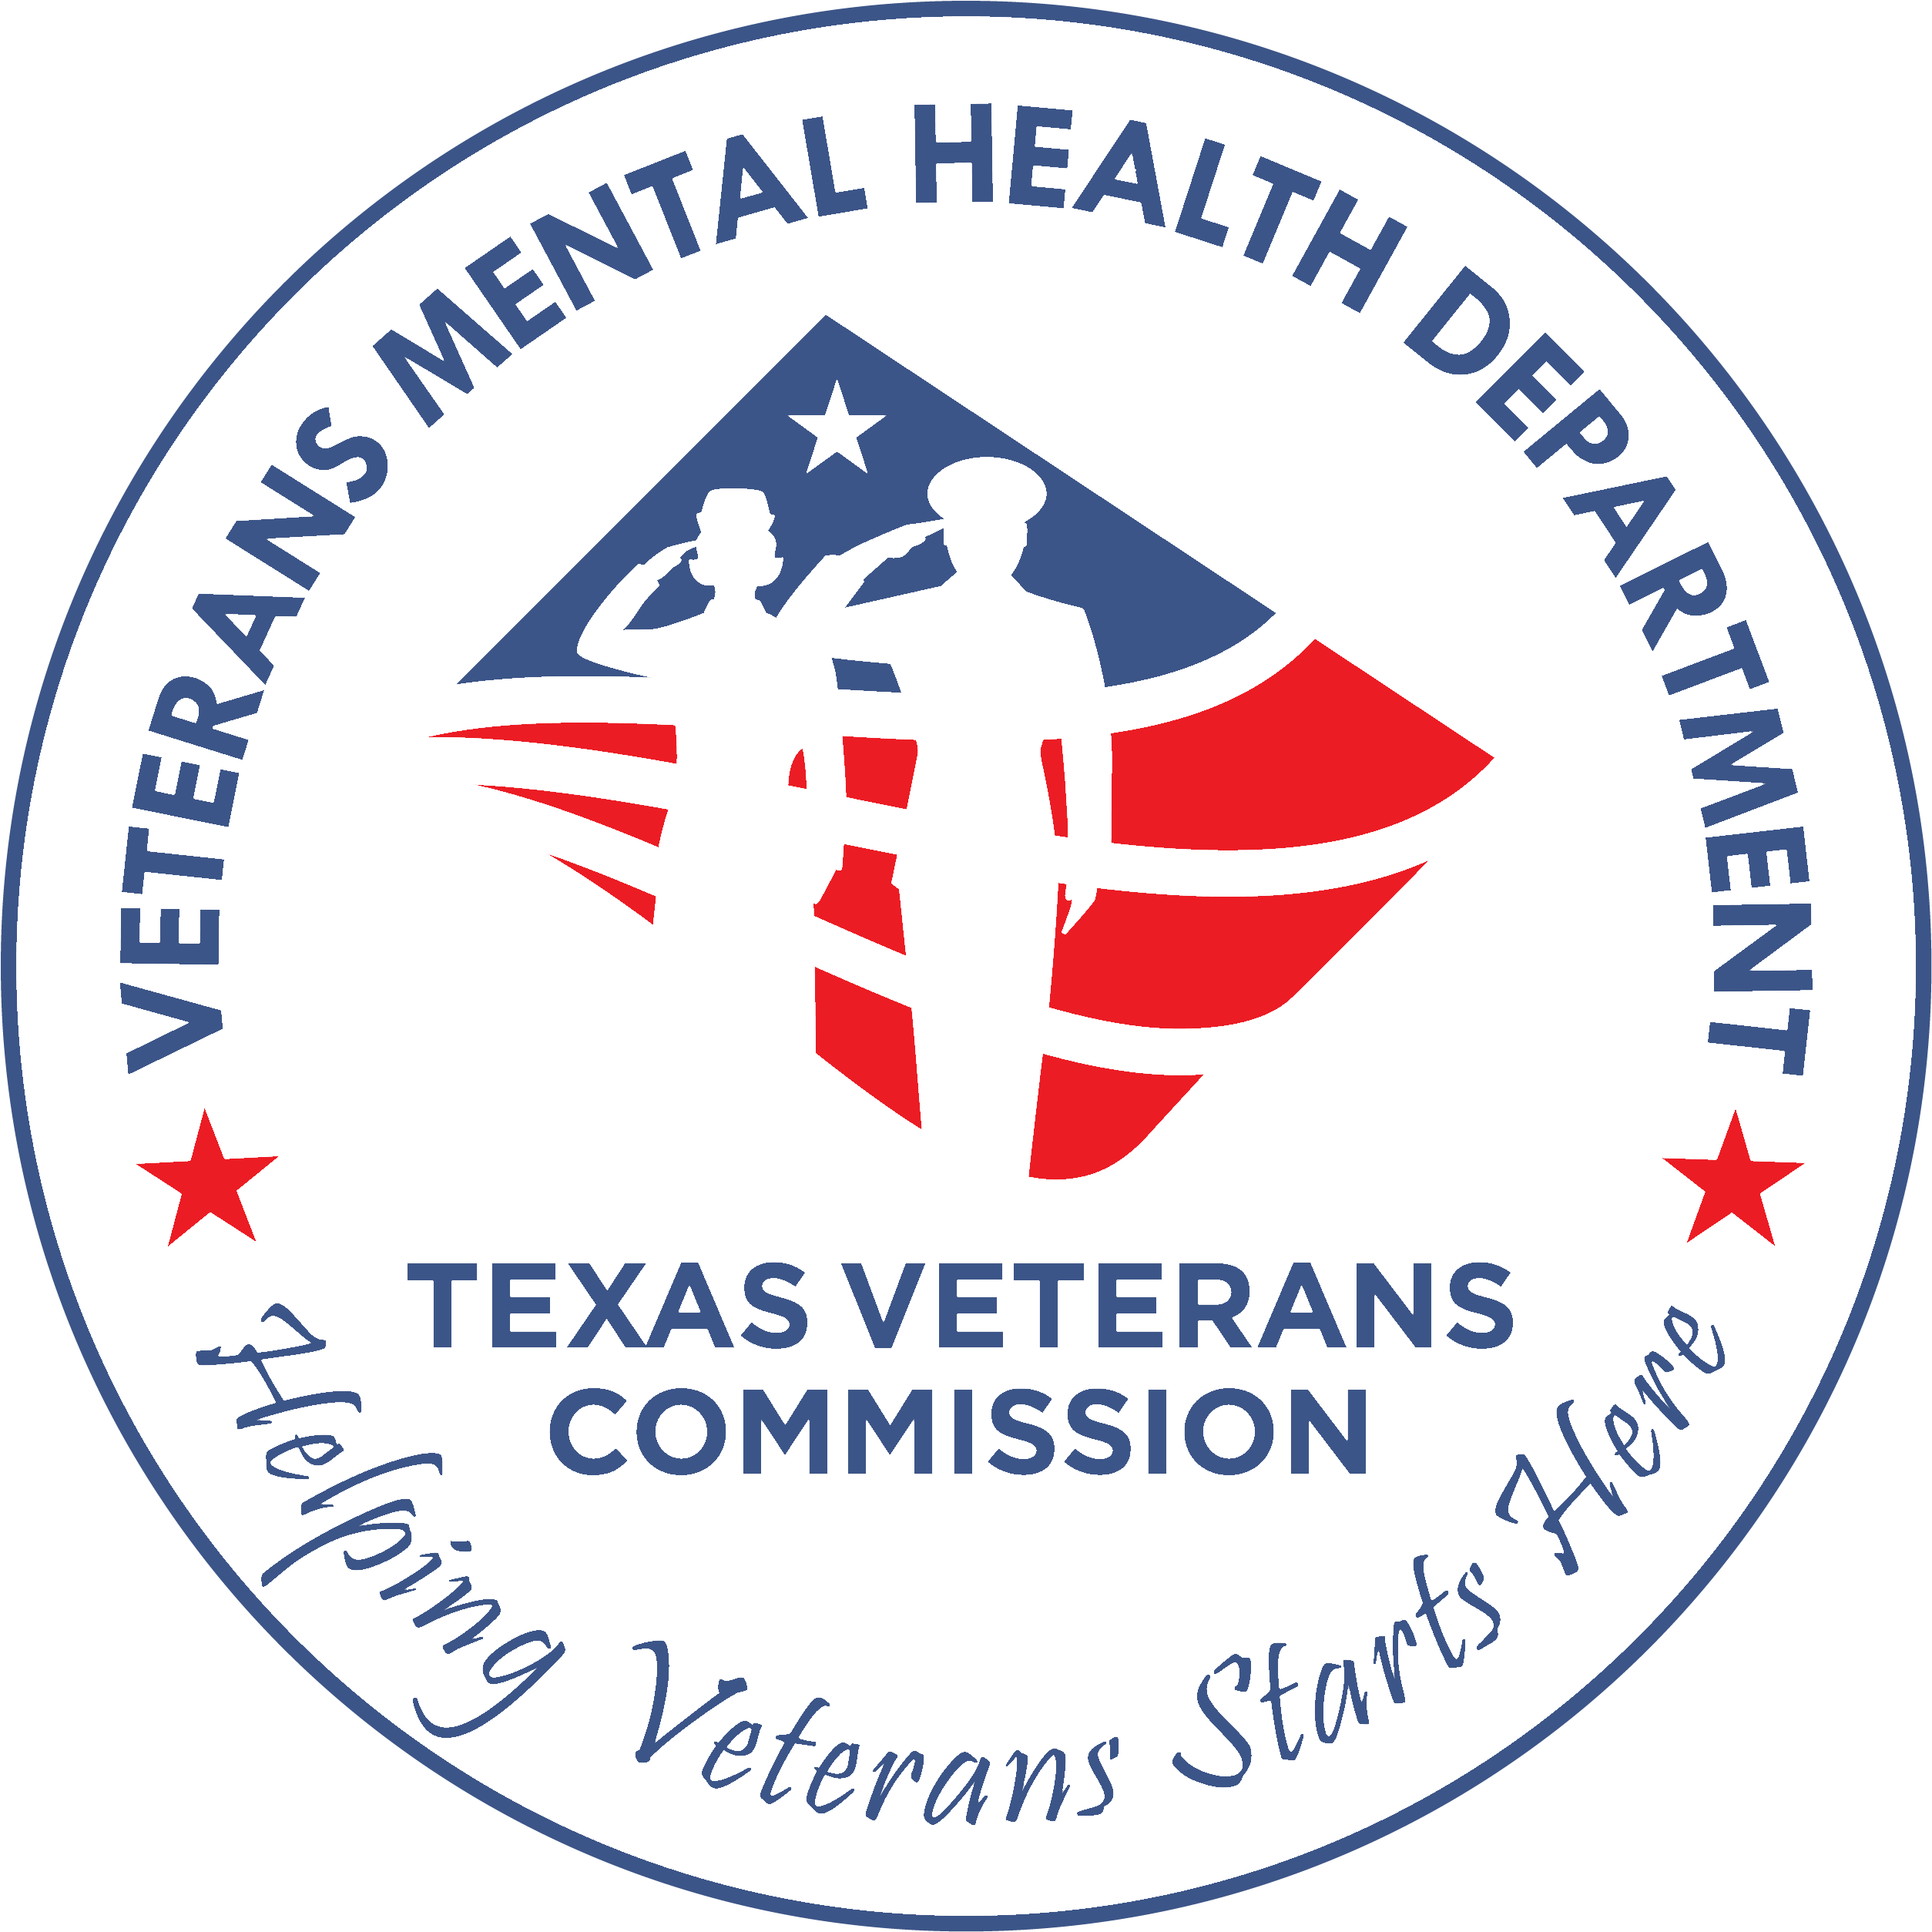 The Texas Veterans Commission logo is presented in a circular design. The graphic depicts the outlines of two individuals saluting against a background that resembles the Texas flag. The name "Texas Veterans Commission" is positioned directly beneath the graphic in the center. The circular shape of the logo contains additional text elements: "Veterans Mental Health Department" wraps around the top portion, while "Helping Veterans Start Here" wraps around the bottom. A red star intersects both the top and bottom text on the left and right sides. This logo represents the Texas Veterans Commission's commitment to supporting veterans' mental health and serving as a starting point for their assistance.